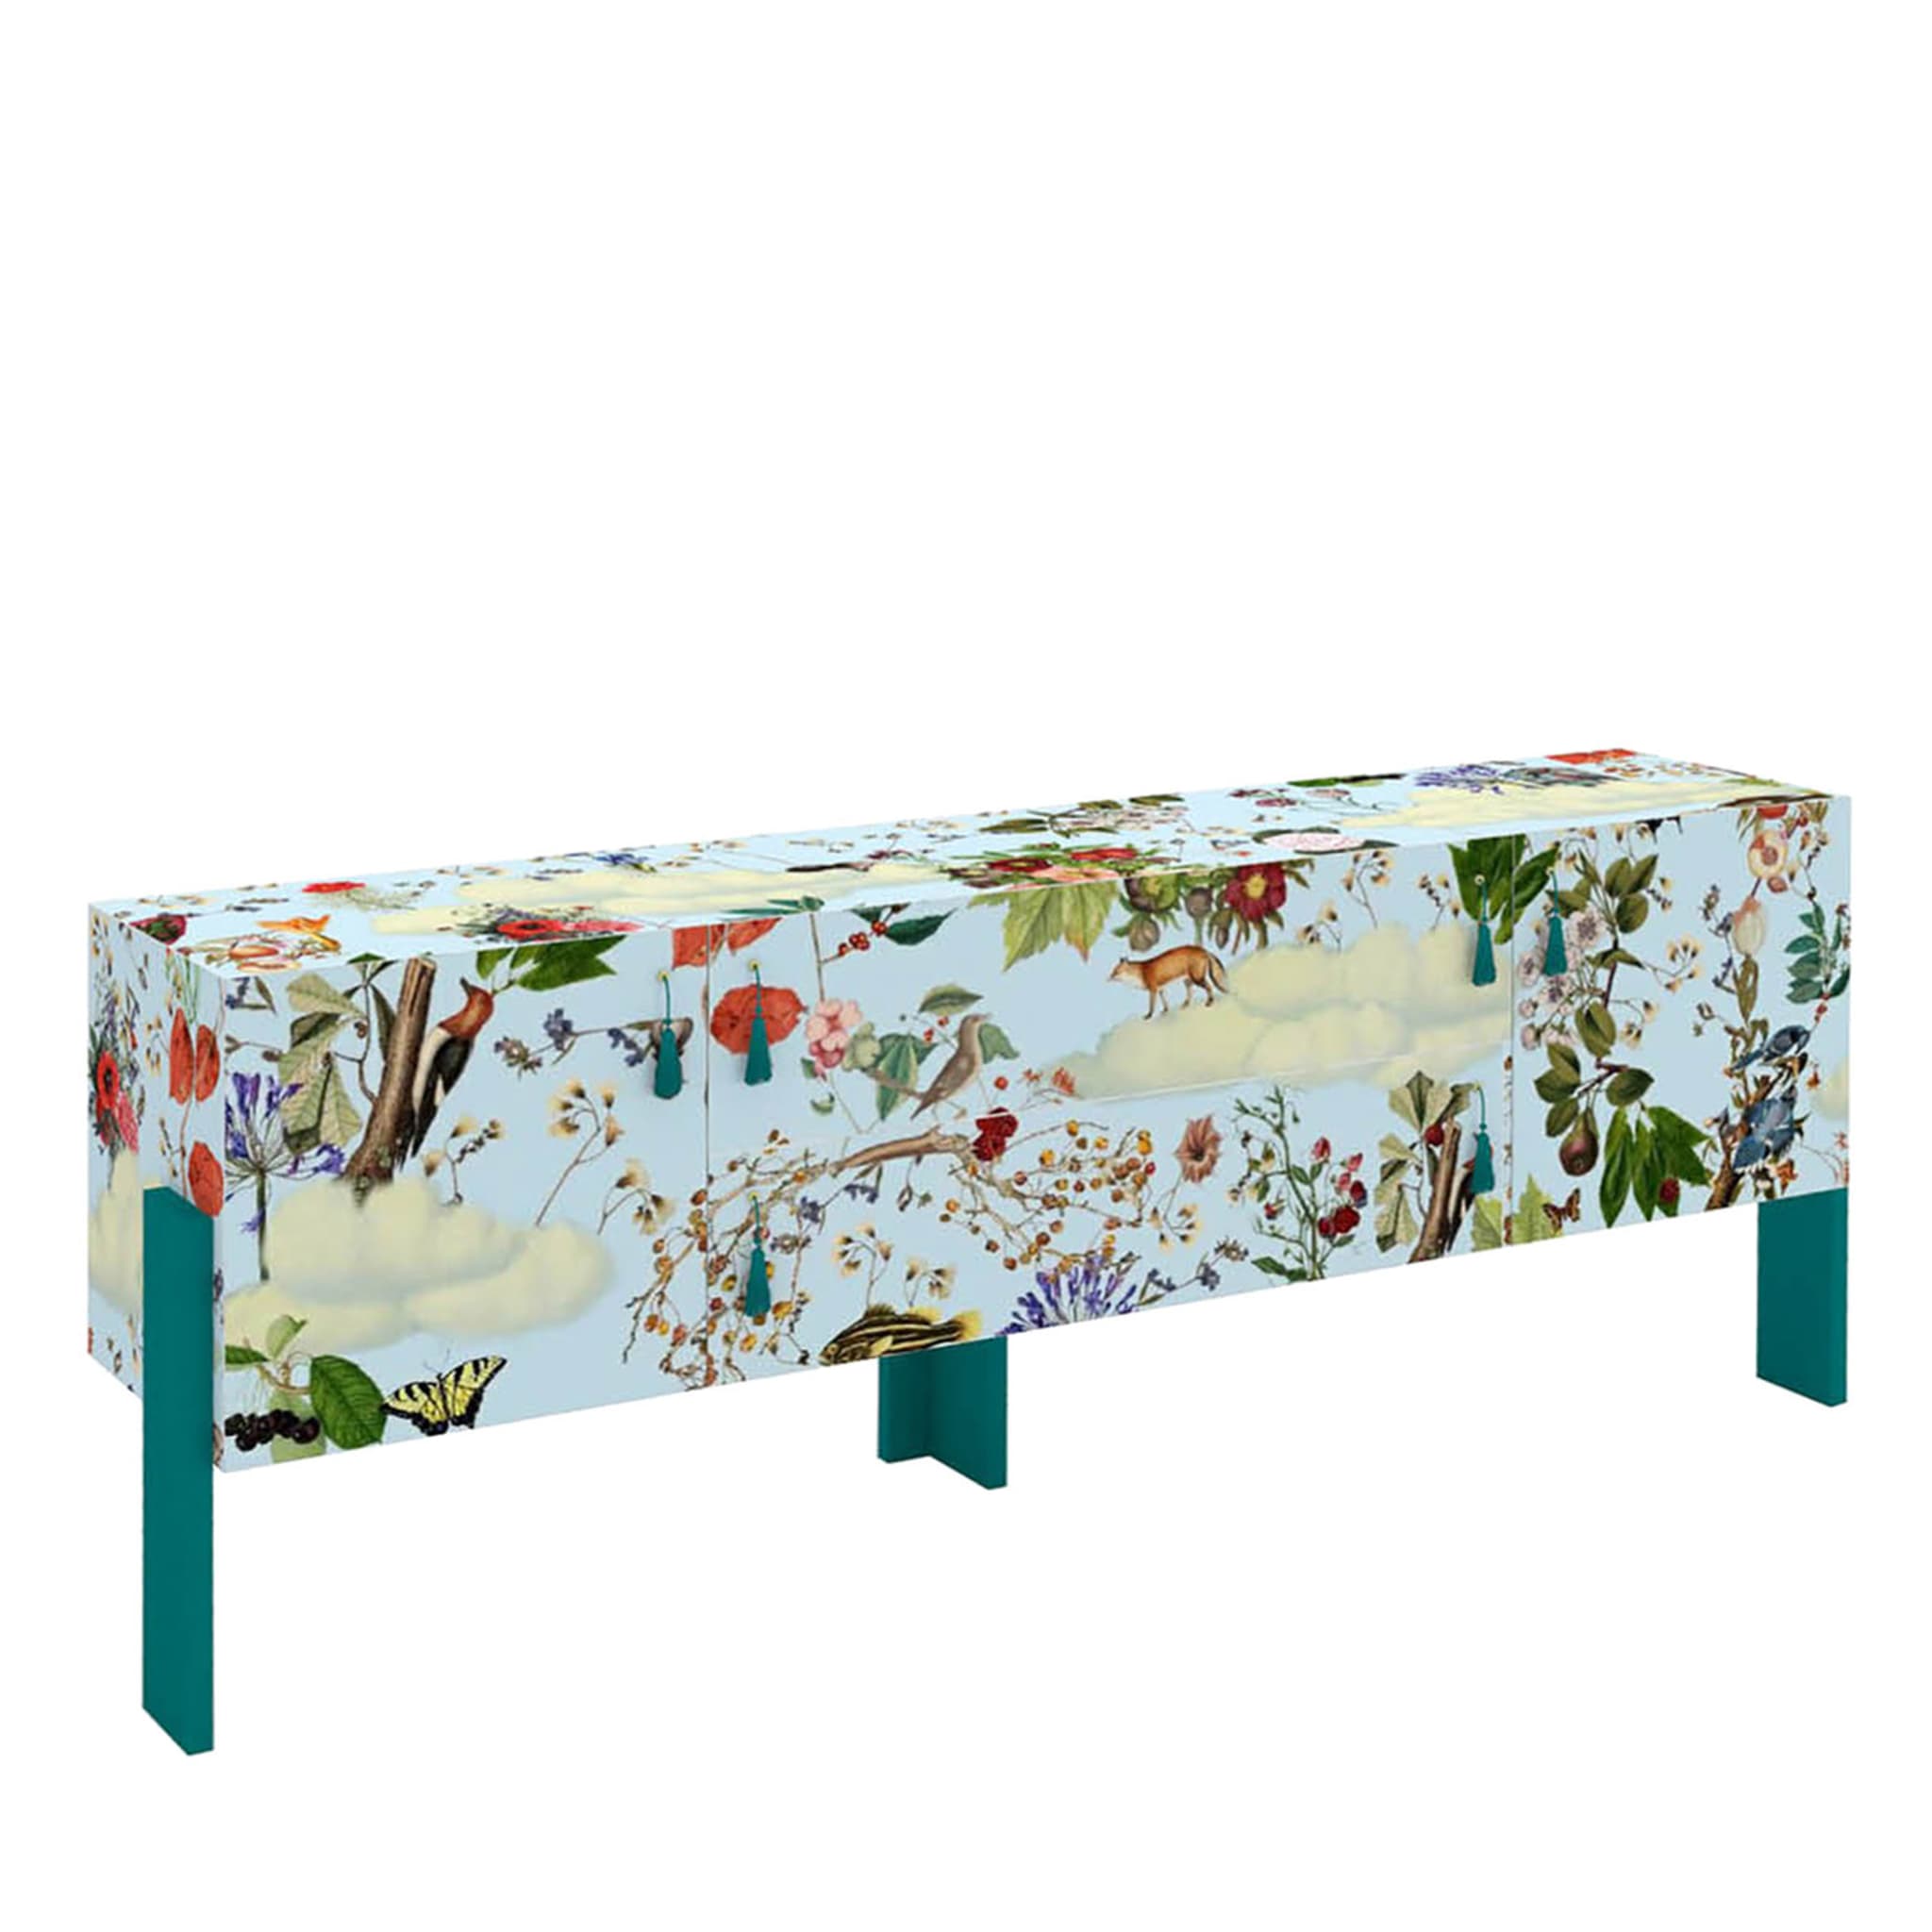 Ziqqurat Floral Polychrome Sideboard by Driade Lab #2 - Main view